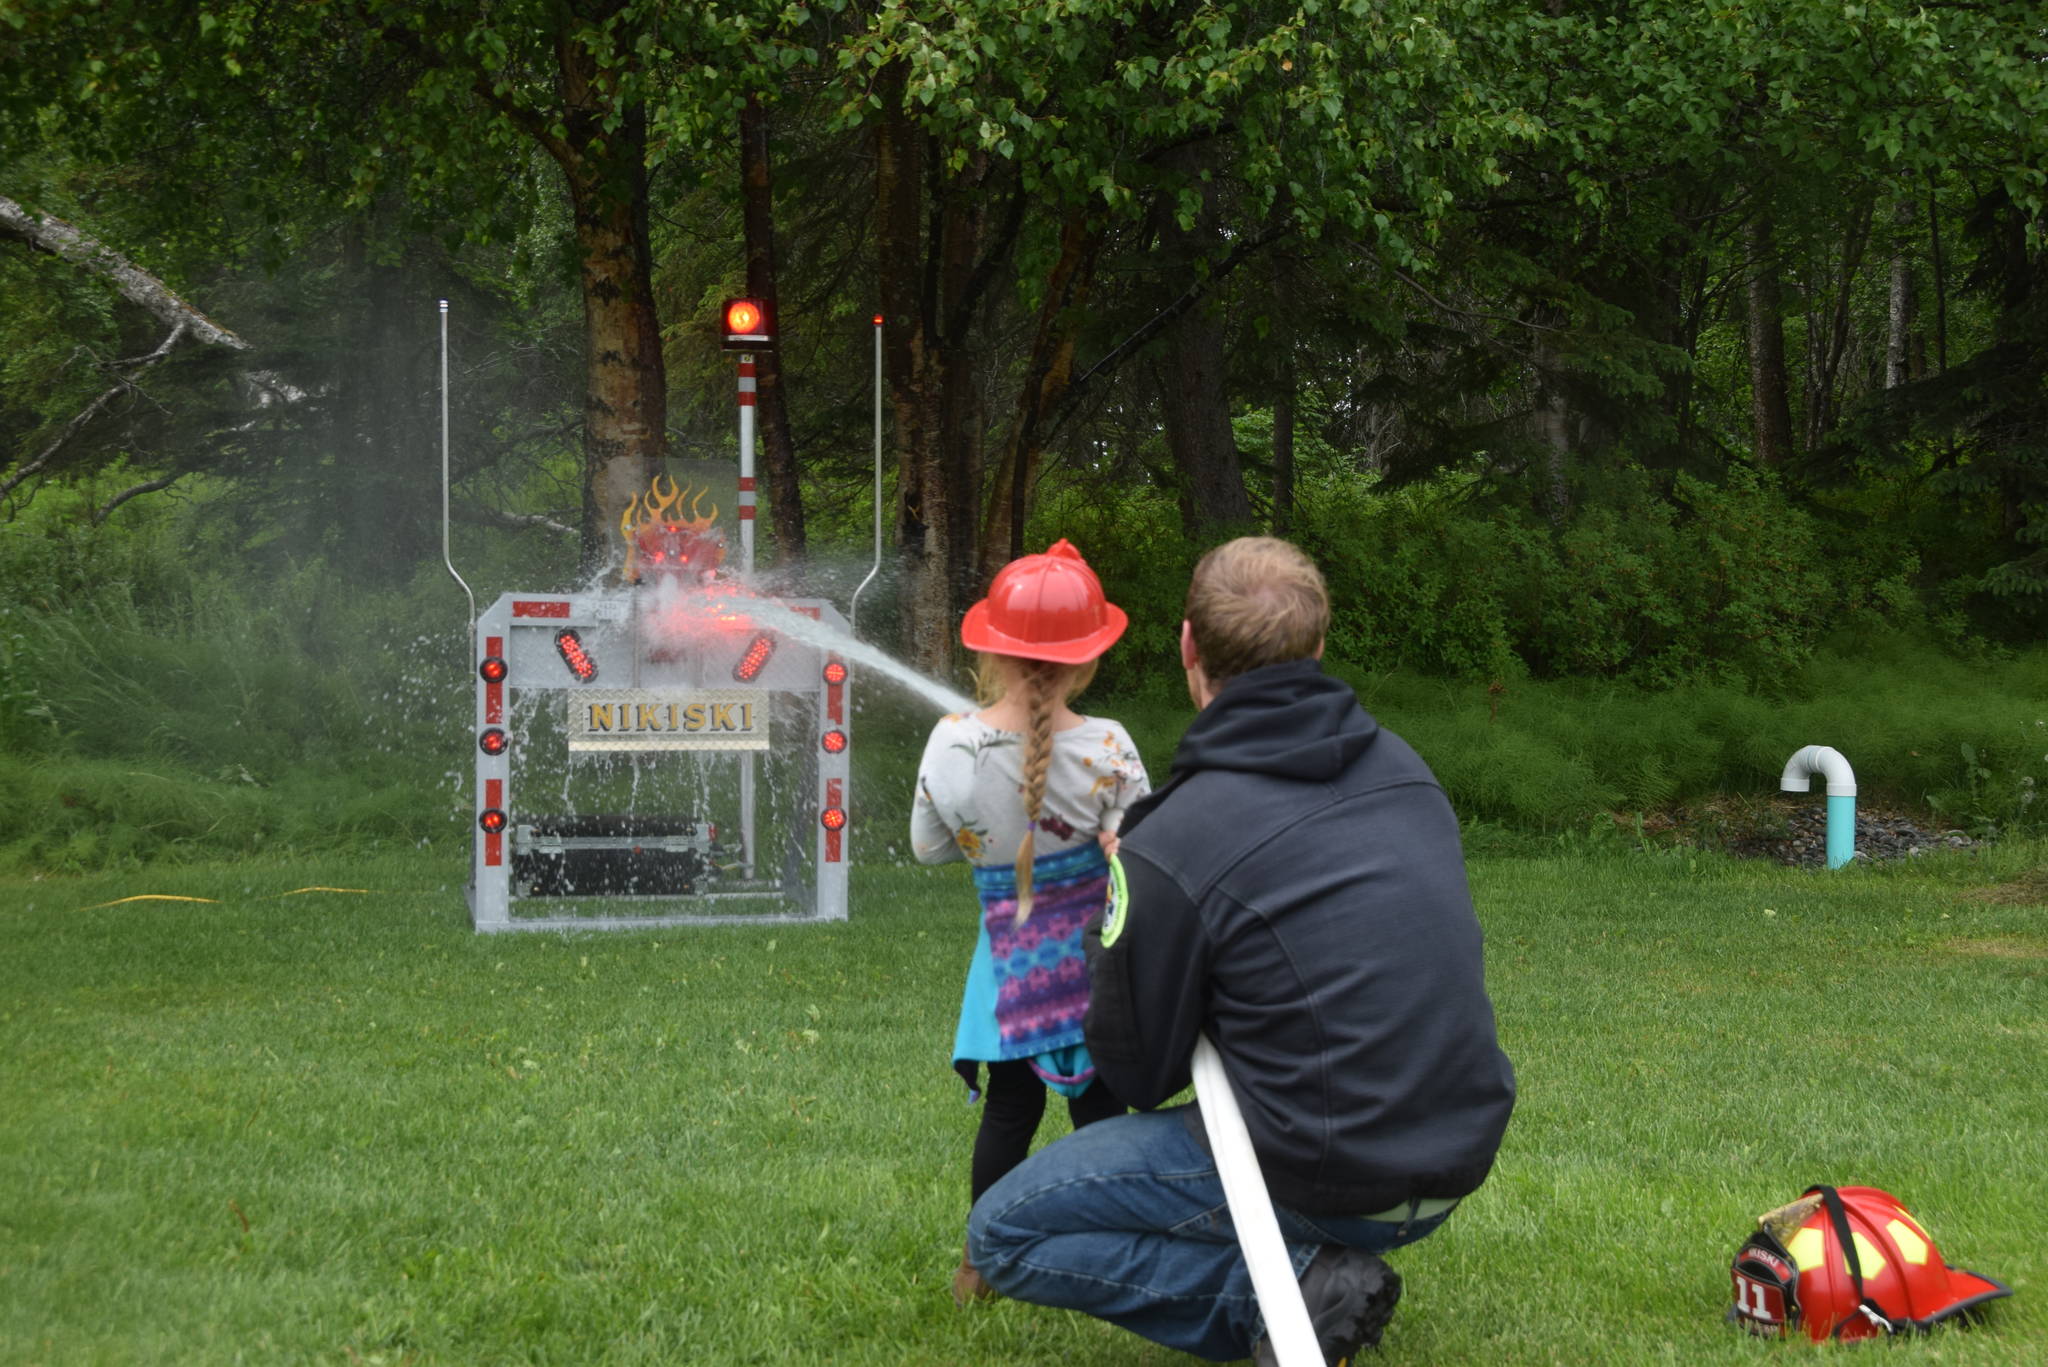 Tyler Smith with the Nikiski Fire Department helps Jenasis Dempster blast a target with a fire hose during the Family Fun in the Midnight Sun festival at the North Peninsula Recreation Center in Nikiski, Alaska on June 15, 2019. (Photo by Brian Mazurek/Peninsula Clarion)